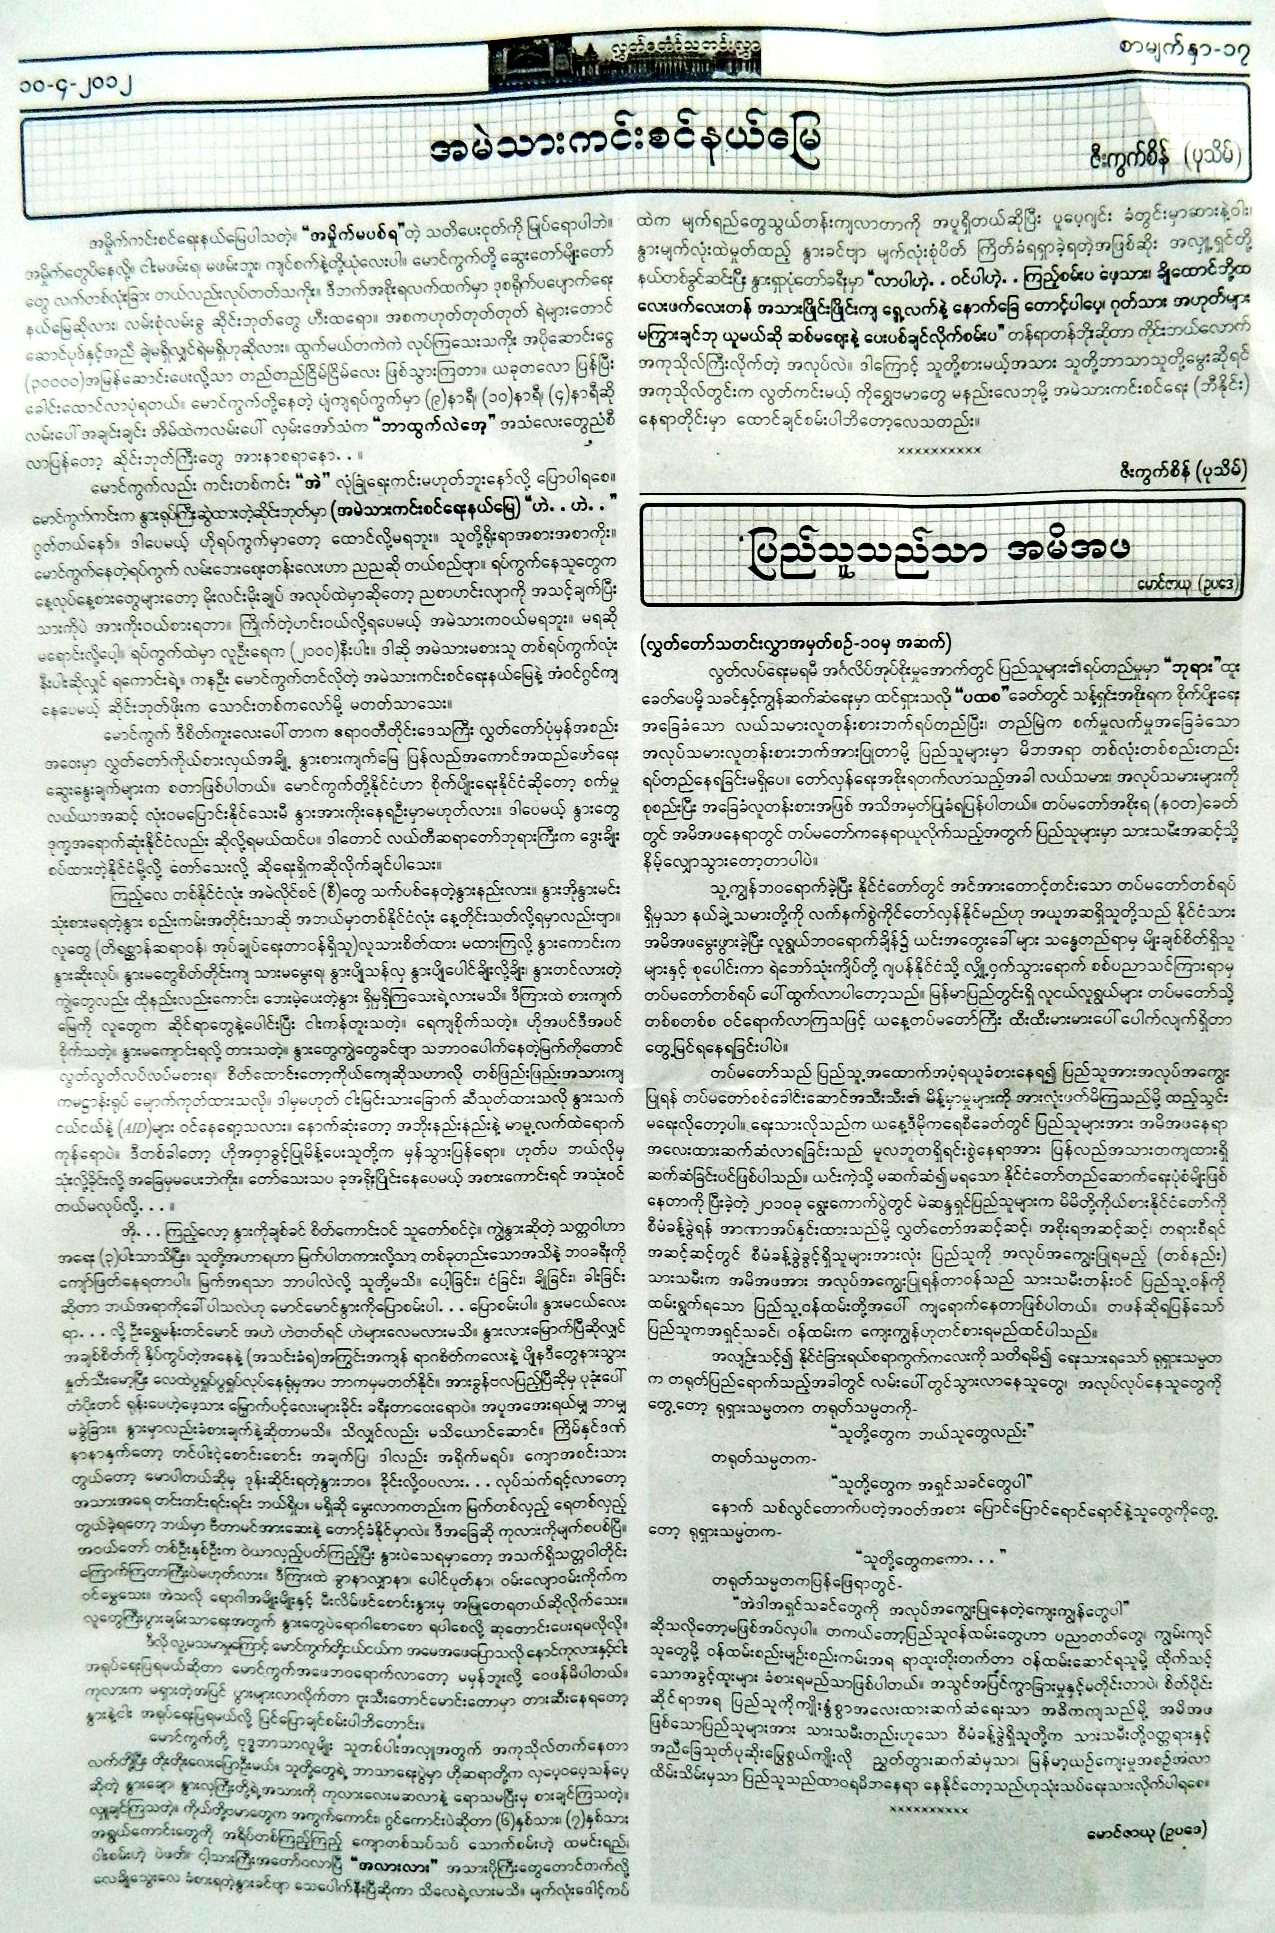  the article “Beef-free Zone” written by Zee Kwat Sein, which insulted Islam and Muslims, was mentioned in page 17 of number 13 of volume 2 of Ayeyarwady Regional (Parliament) Hluttaw’s Newsletter